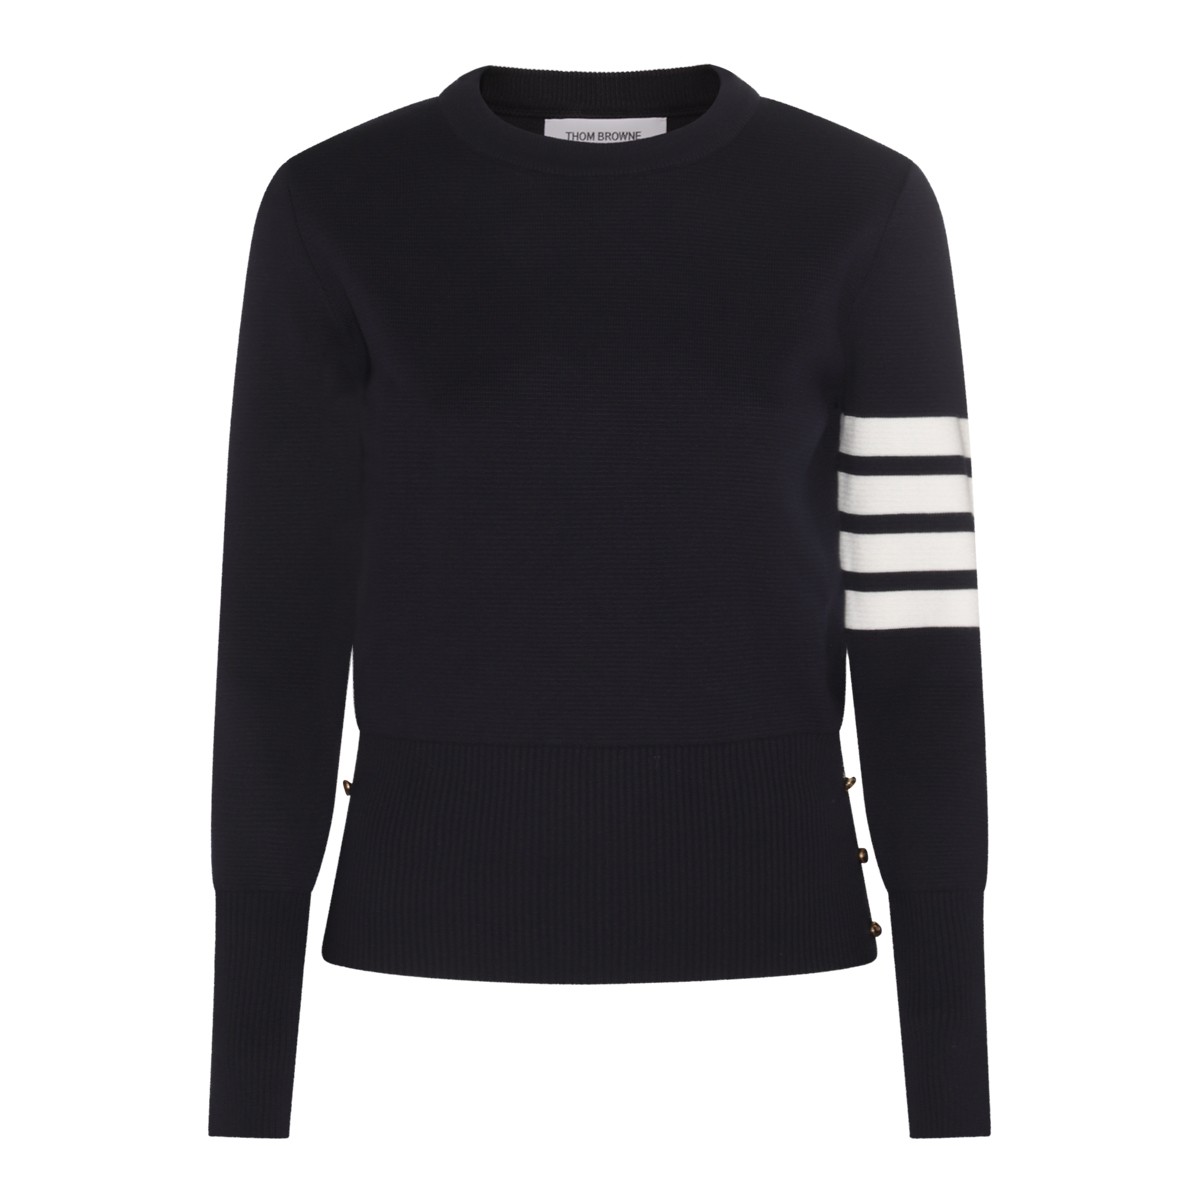 NAVY BLUE AND WHITE COTTON JUMPER